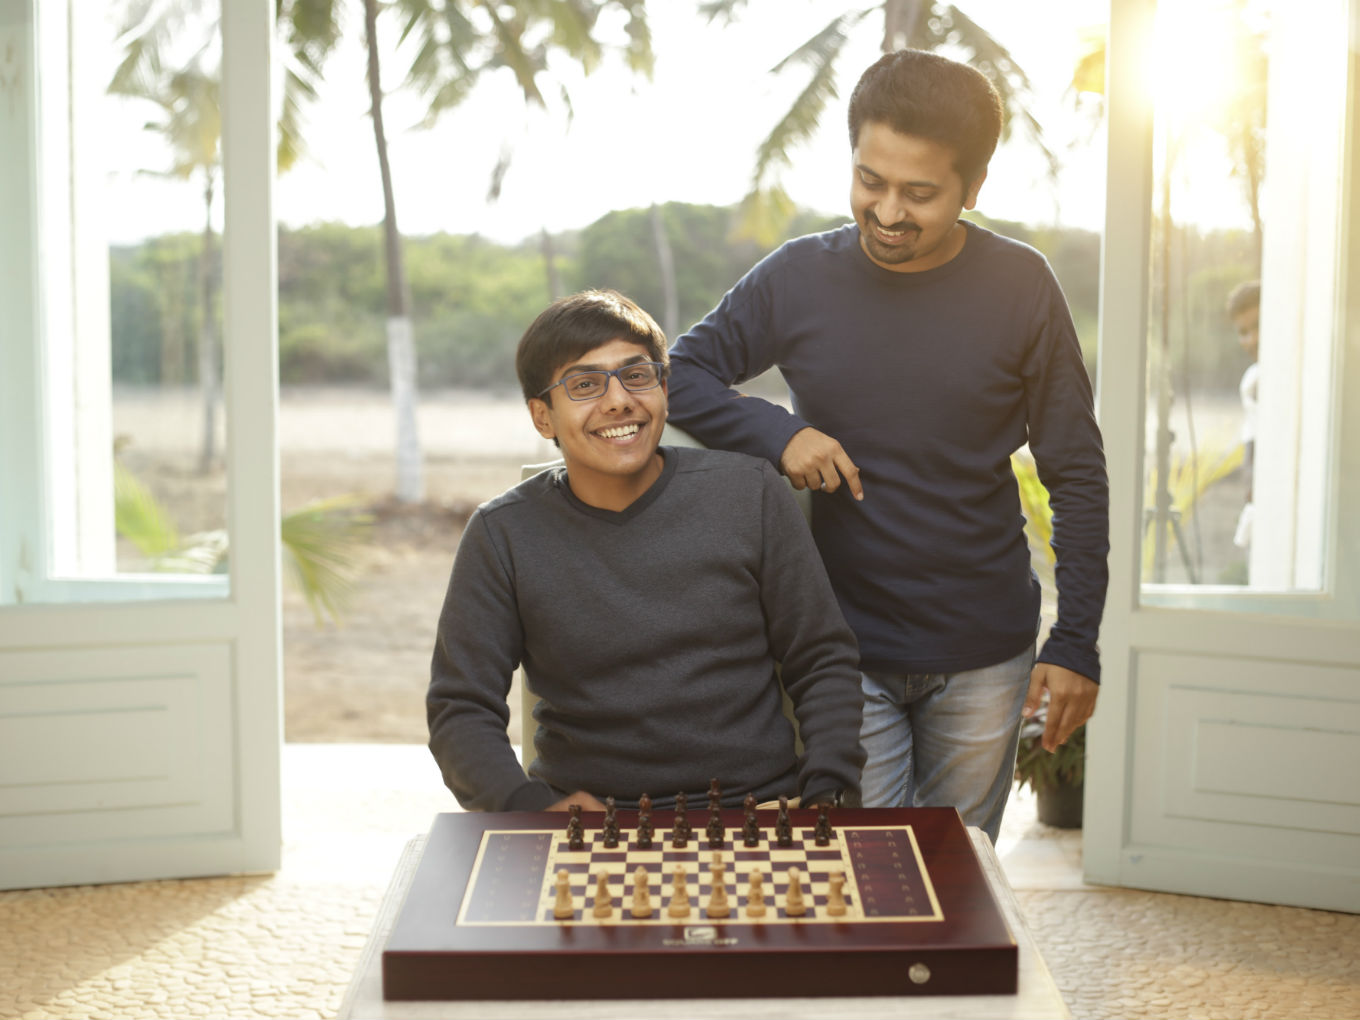 Exclusive: Square Off Checkmates Old-Style Chess With Its AI Moves, Raises $1.1 Mn